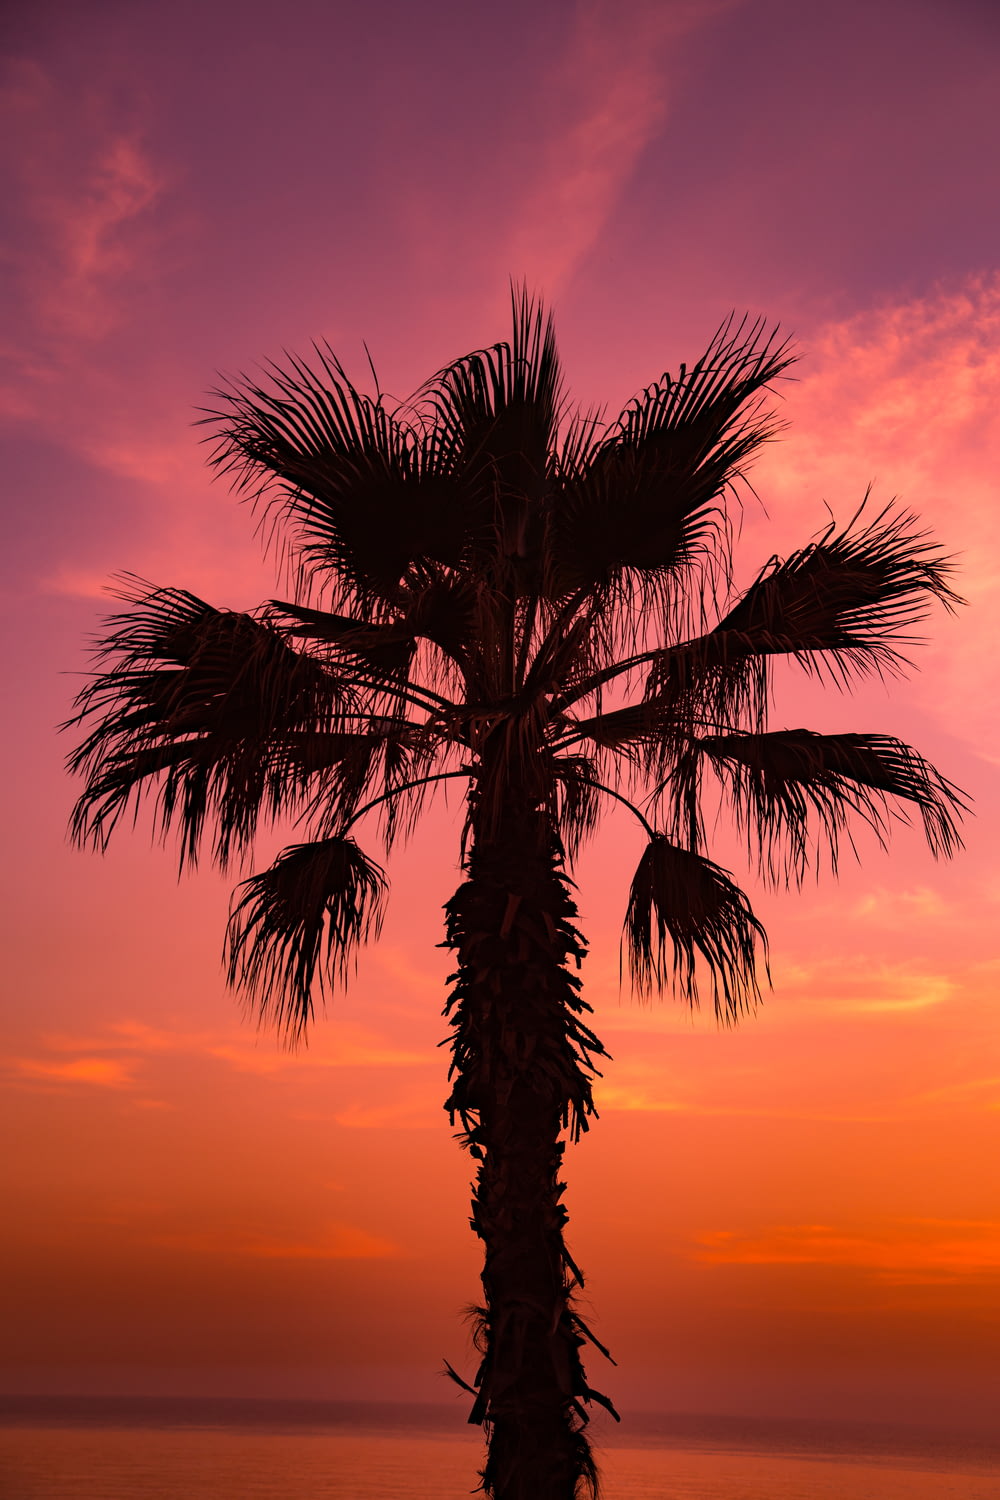 sago palm tree under pink sky at sunsetr